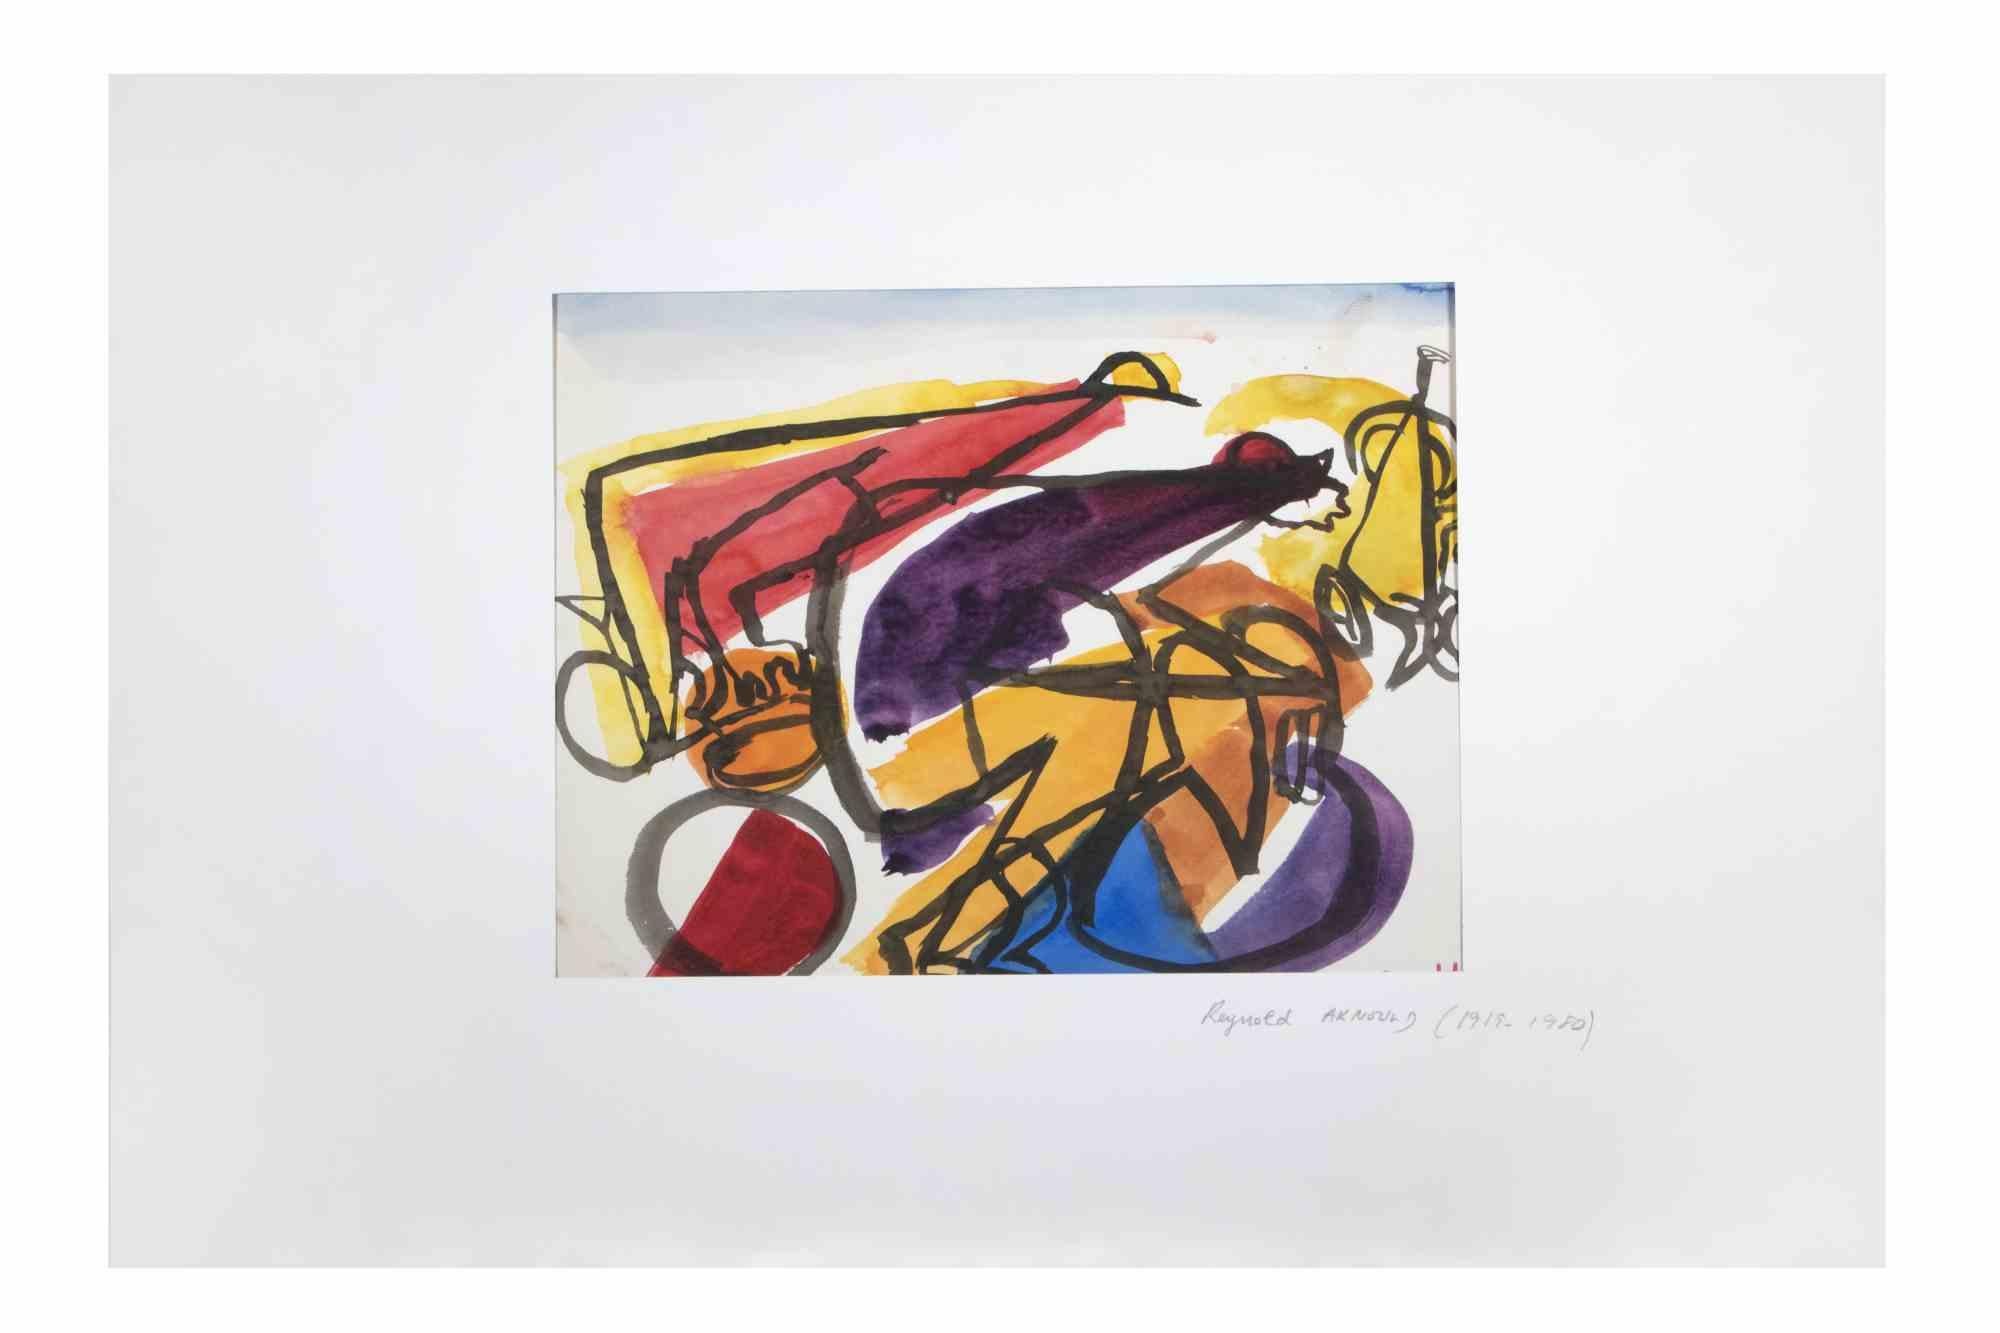 Abstract Composition is a Watercolor artwork realized by Reynold Arnould  (Le Havre 1919 - Parigi 1980) in 1970.

Good condition included a white cardboard passpartout (35x51 cm).

Hand-signed by the artist on the lower right corner.

Reynold